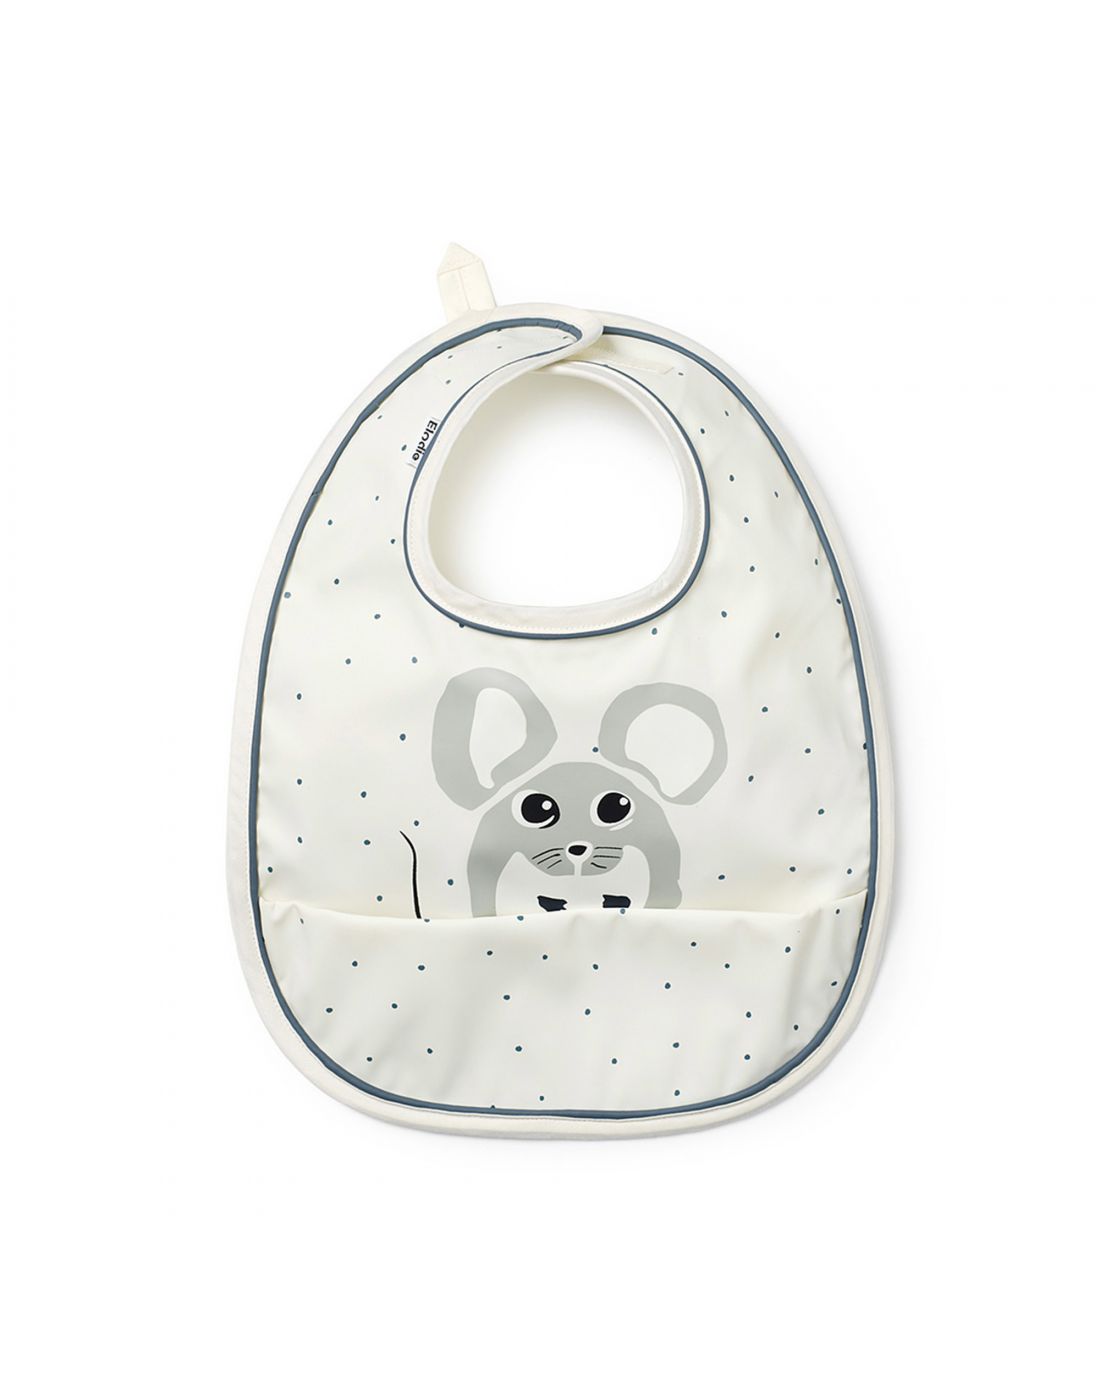 Elodie Details Baby Bib Forest Mouse Max